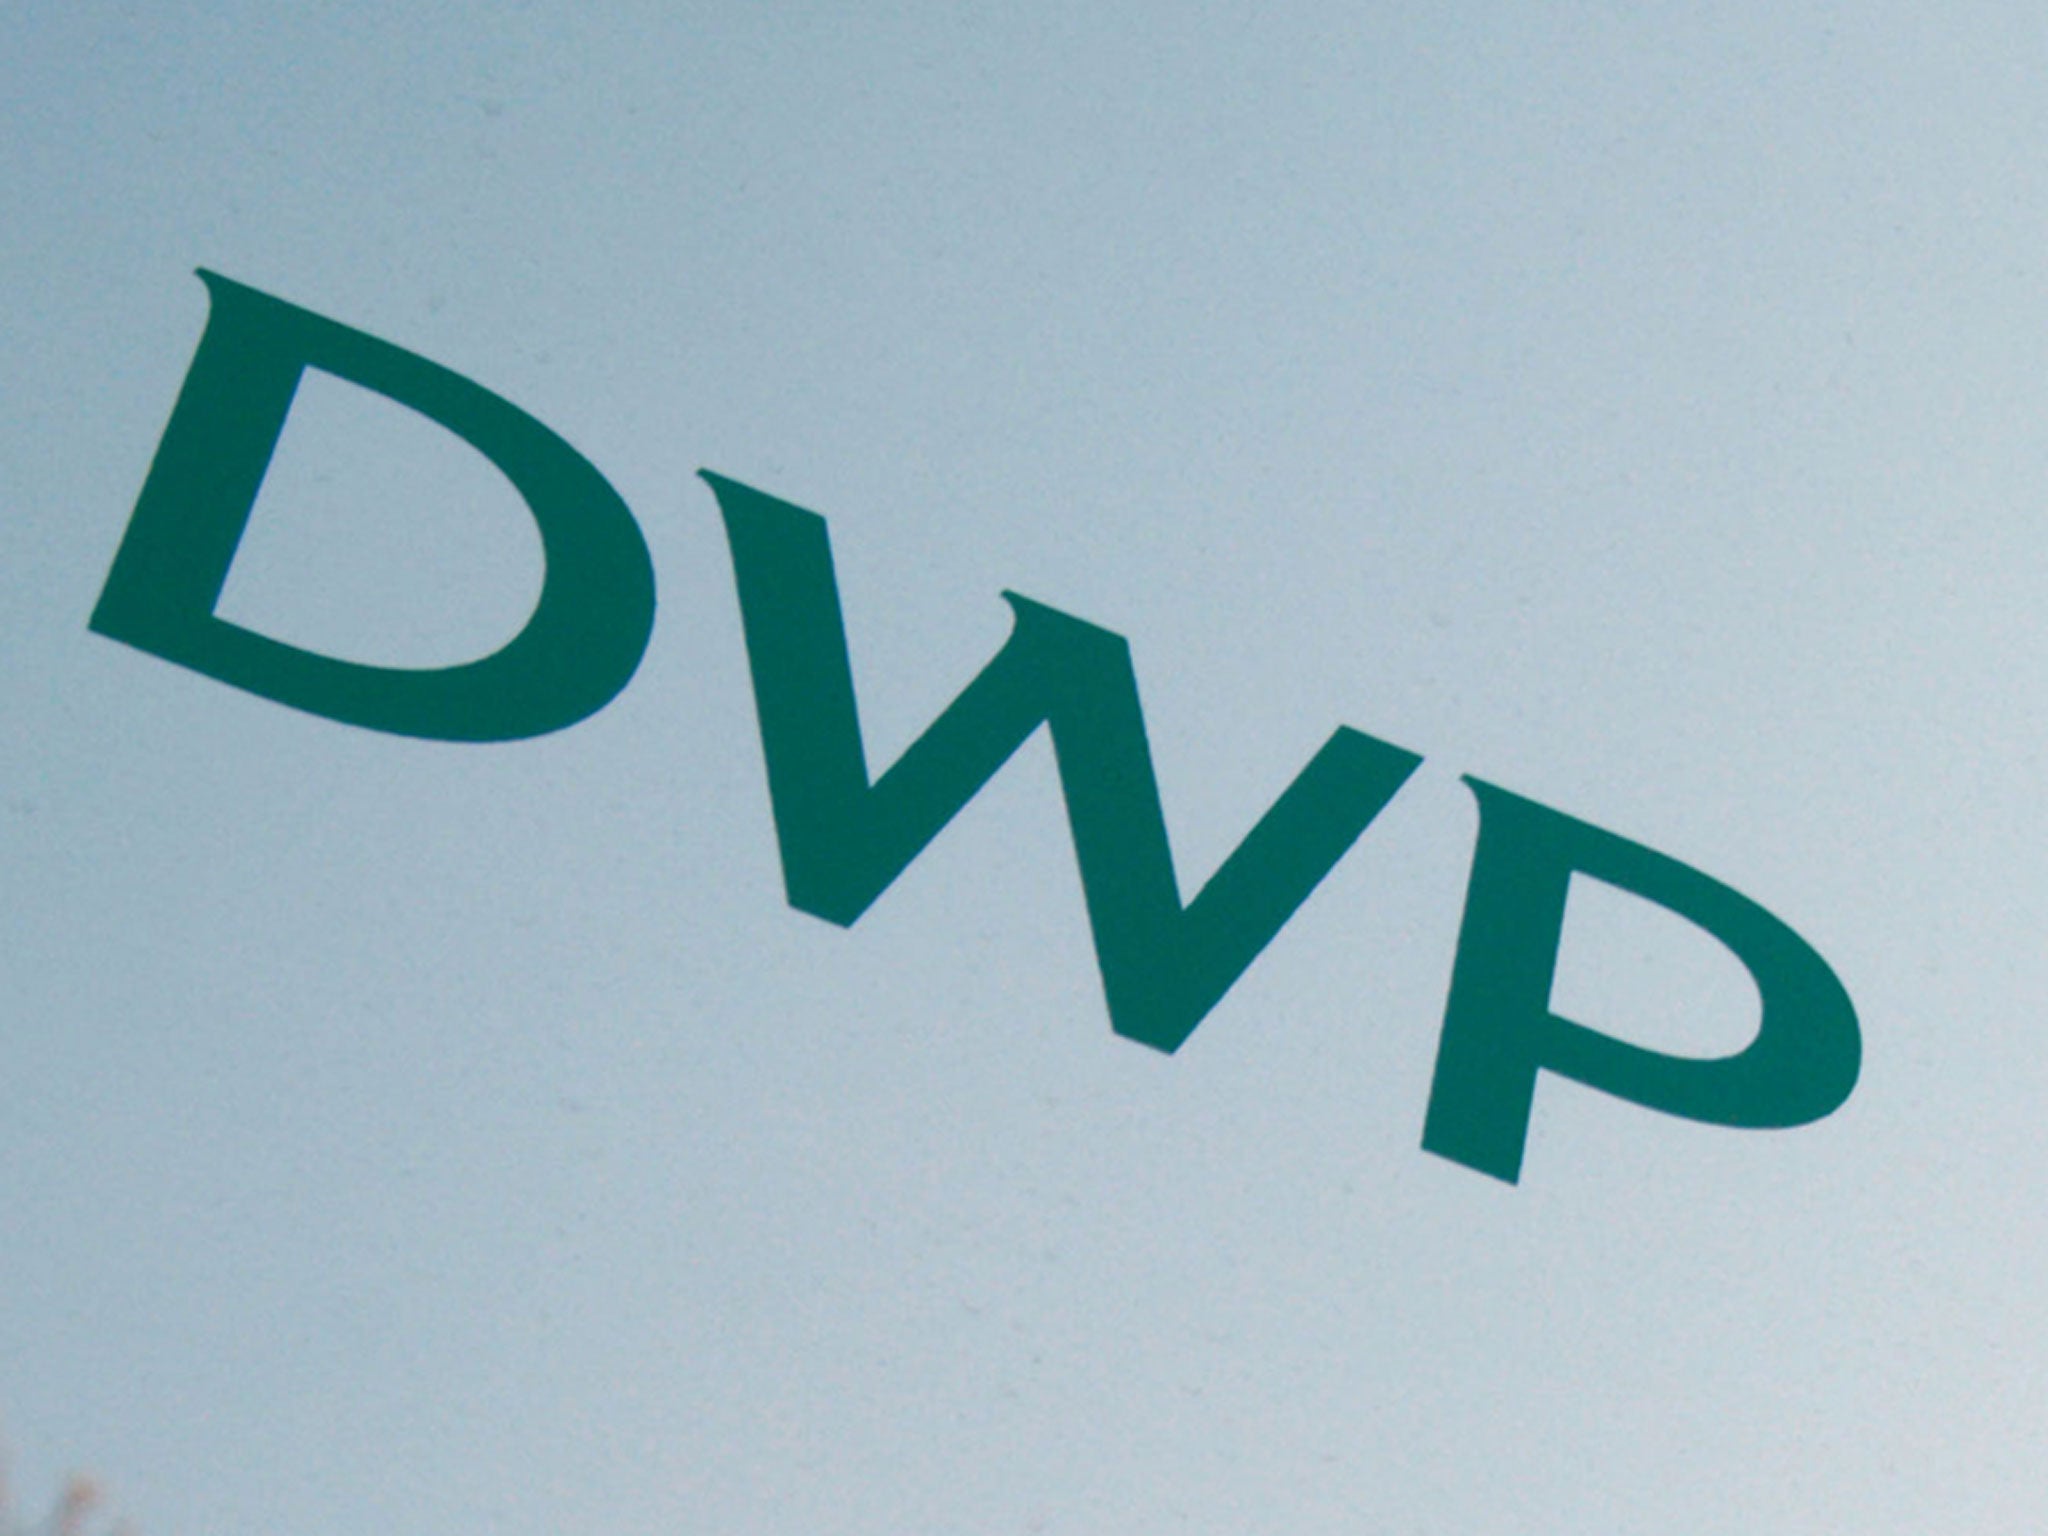 The letter purported to be from the DWP, but it wasn't